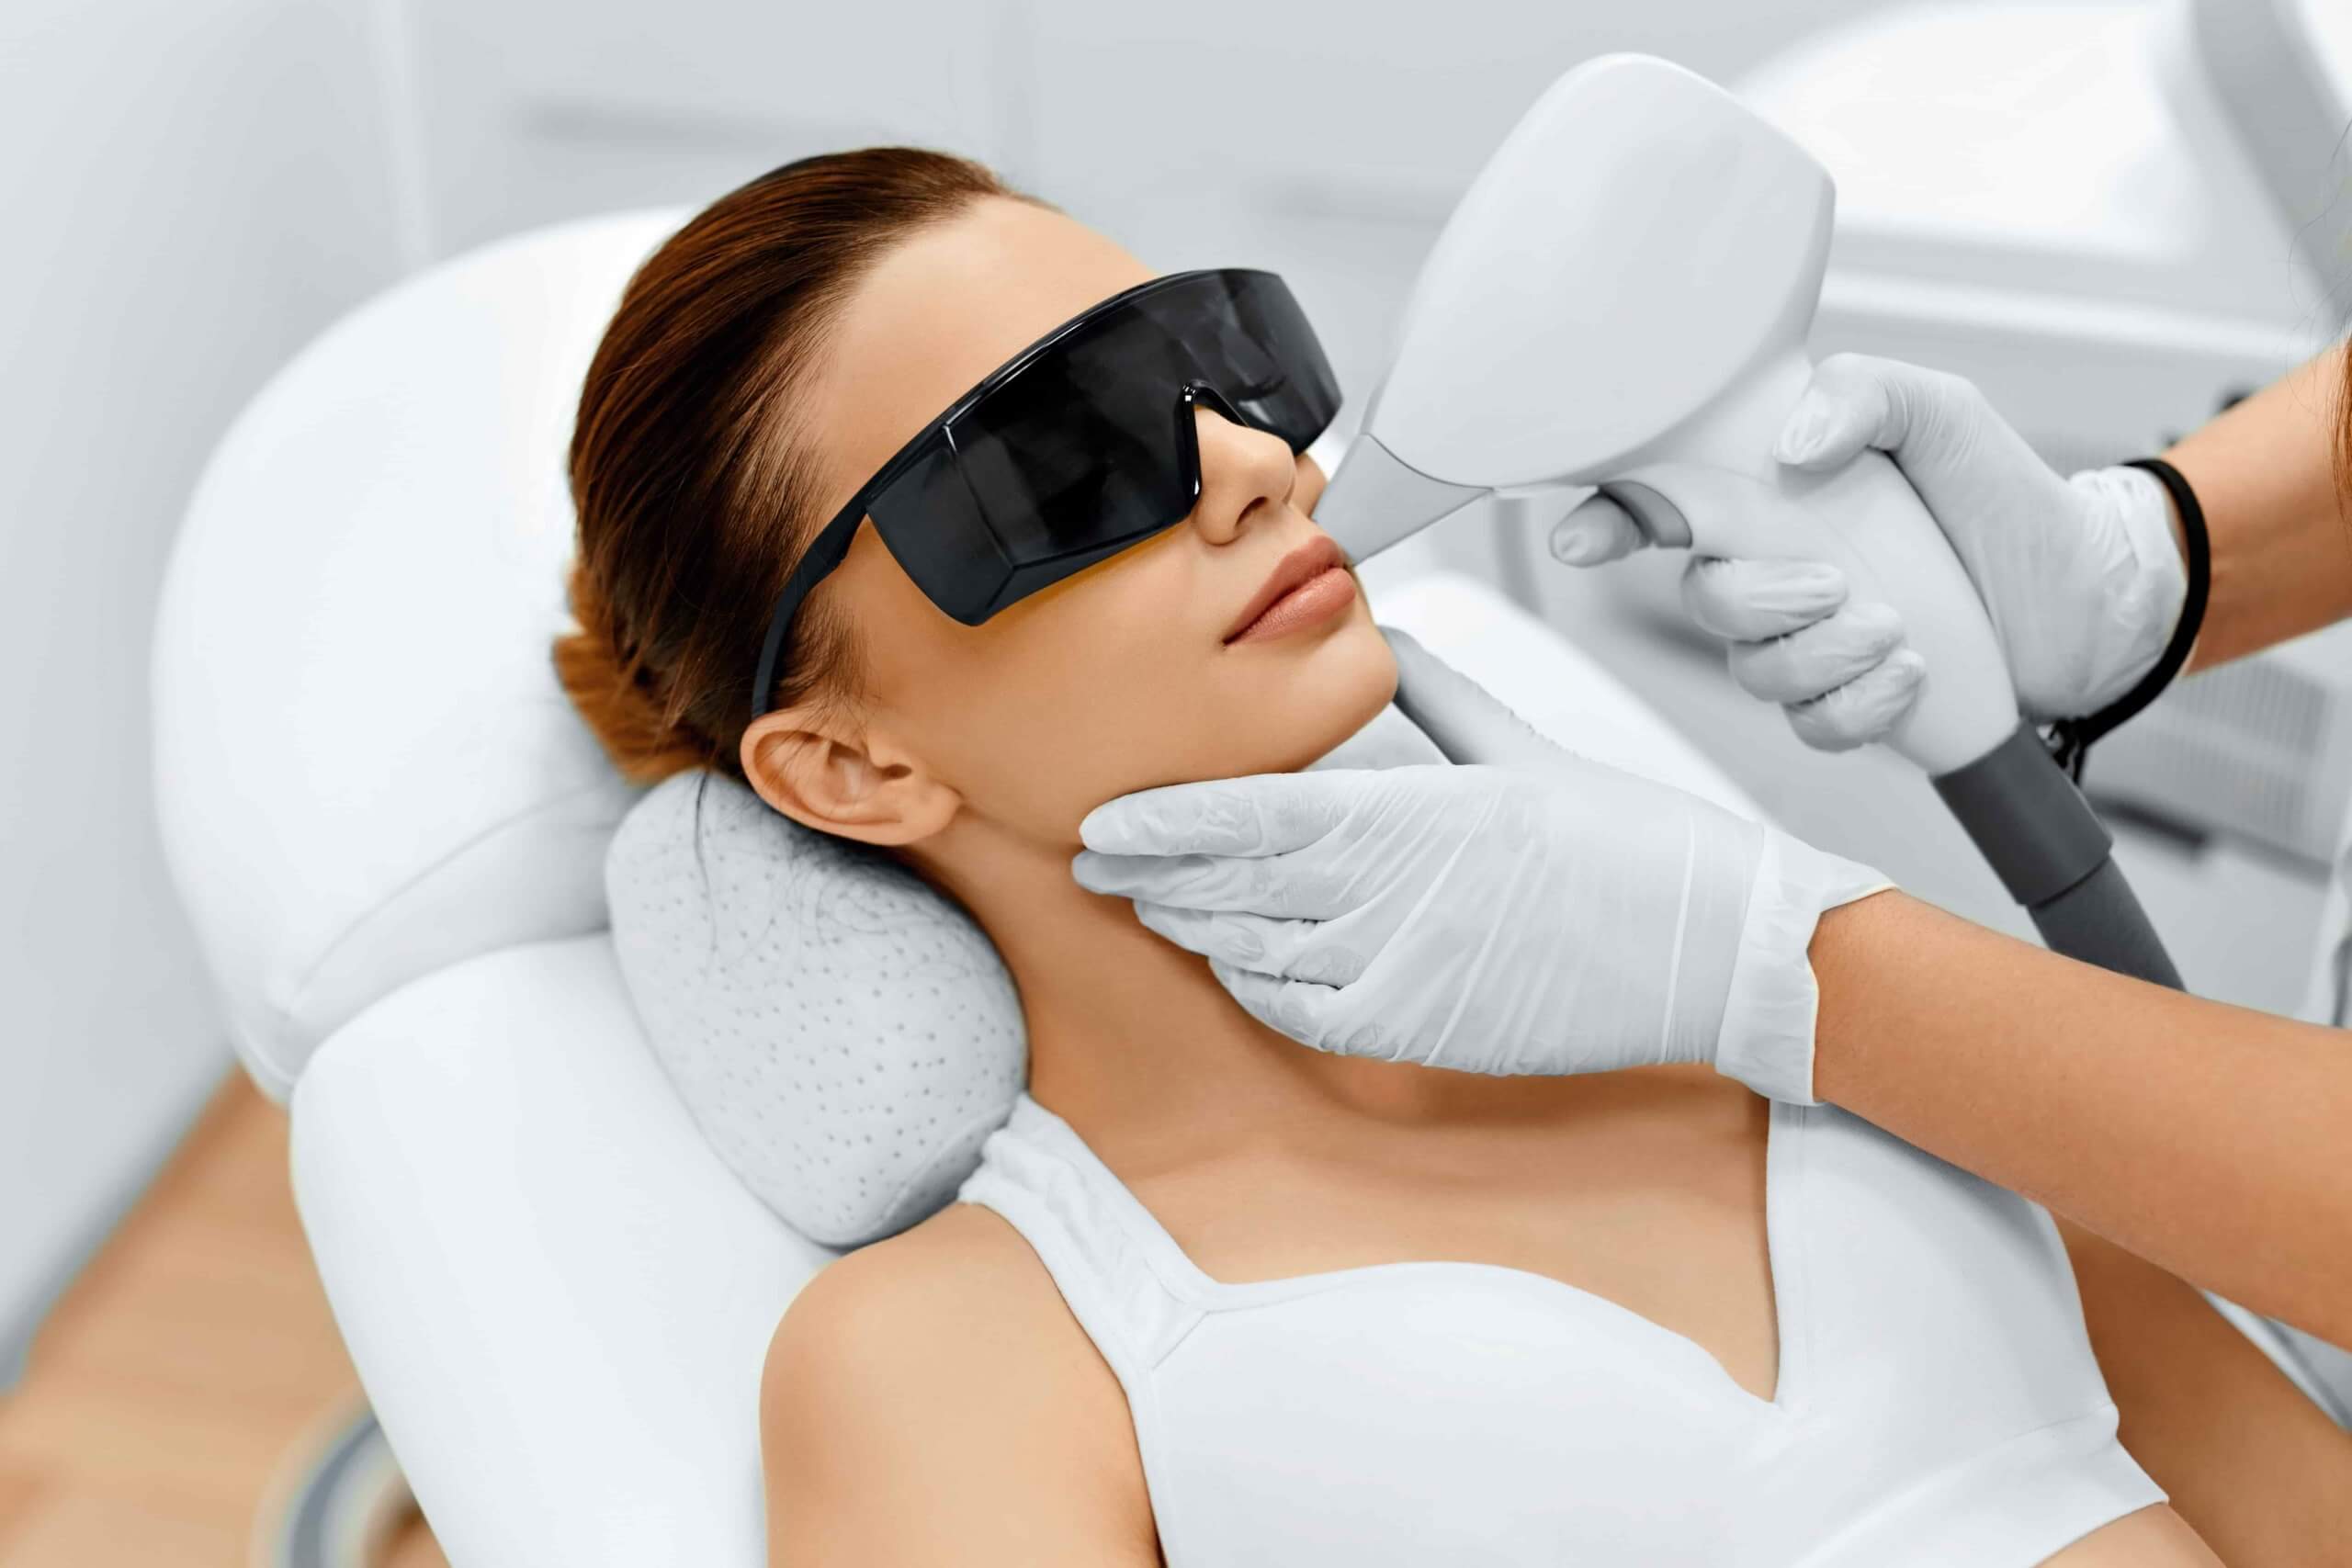 How laser hair removal works and its effectiveness for different skin and hair types